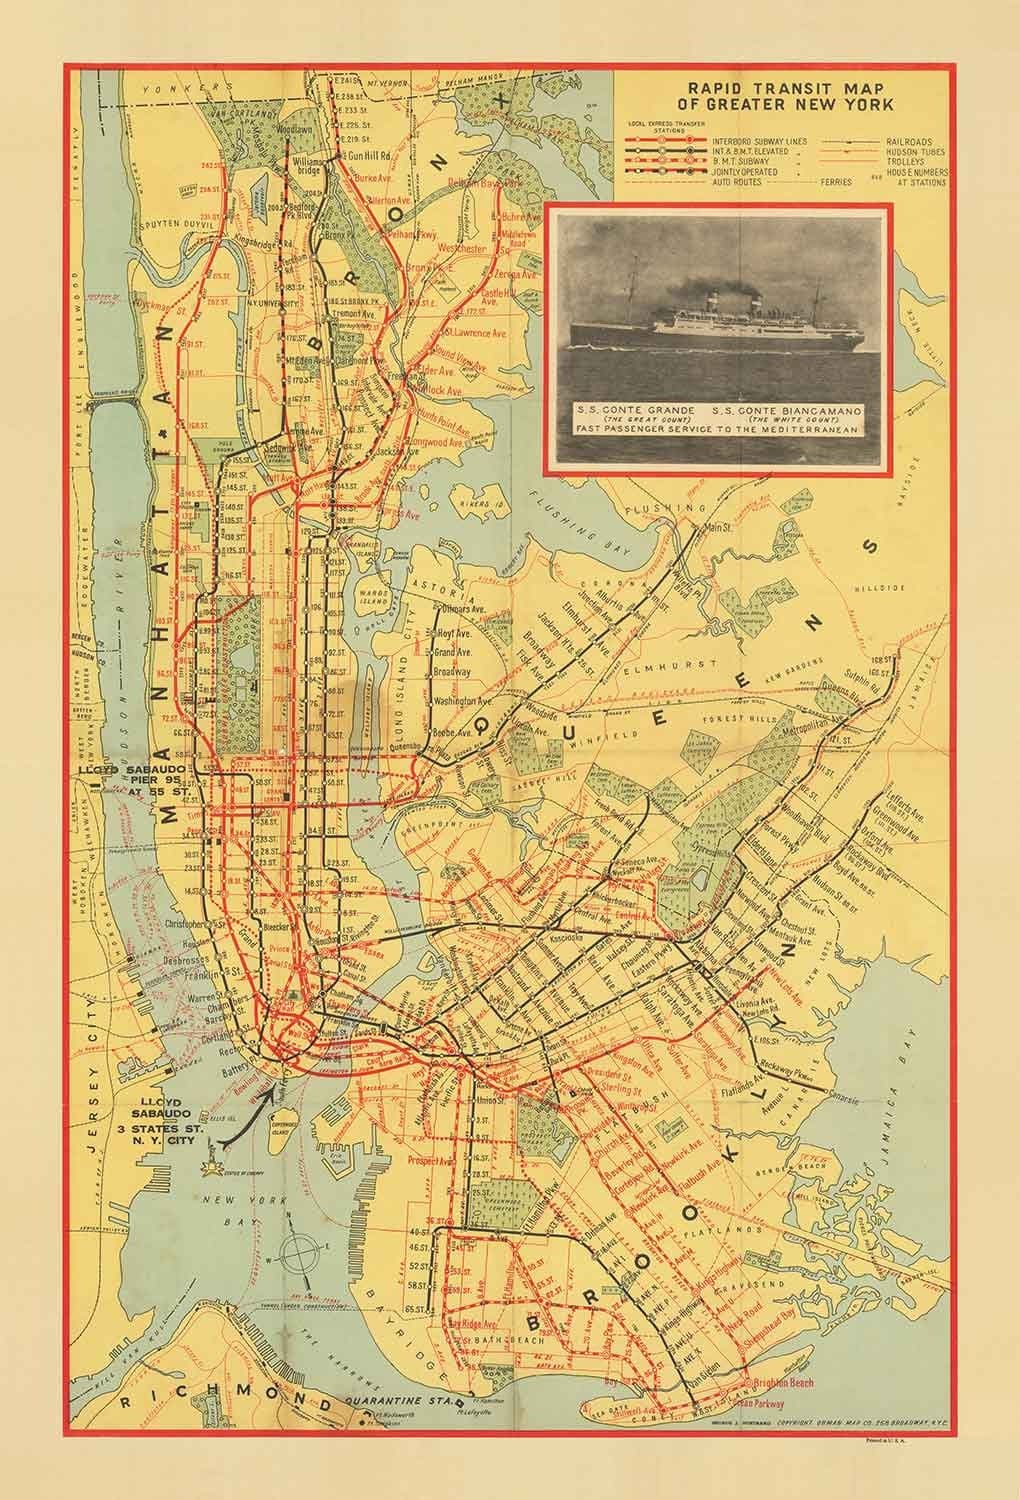 Old Subway Map of New York City in 1927 - Queens, Brooklyn, Railway, Manhattan, INT, BMT, Interboro Elevated Rail